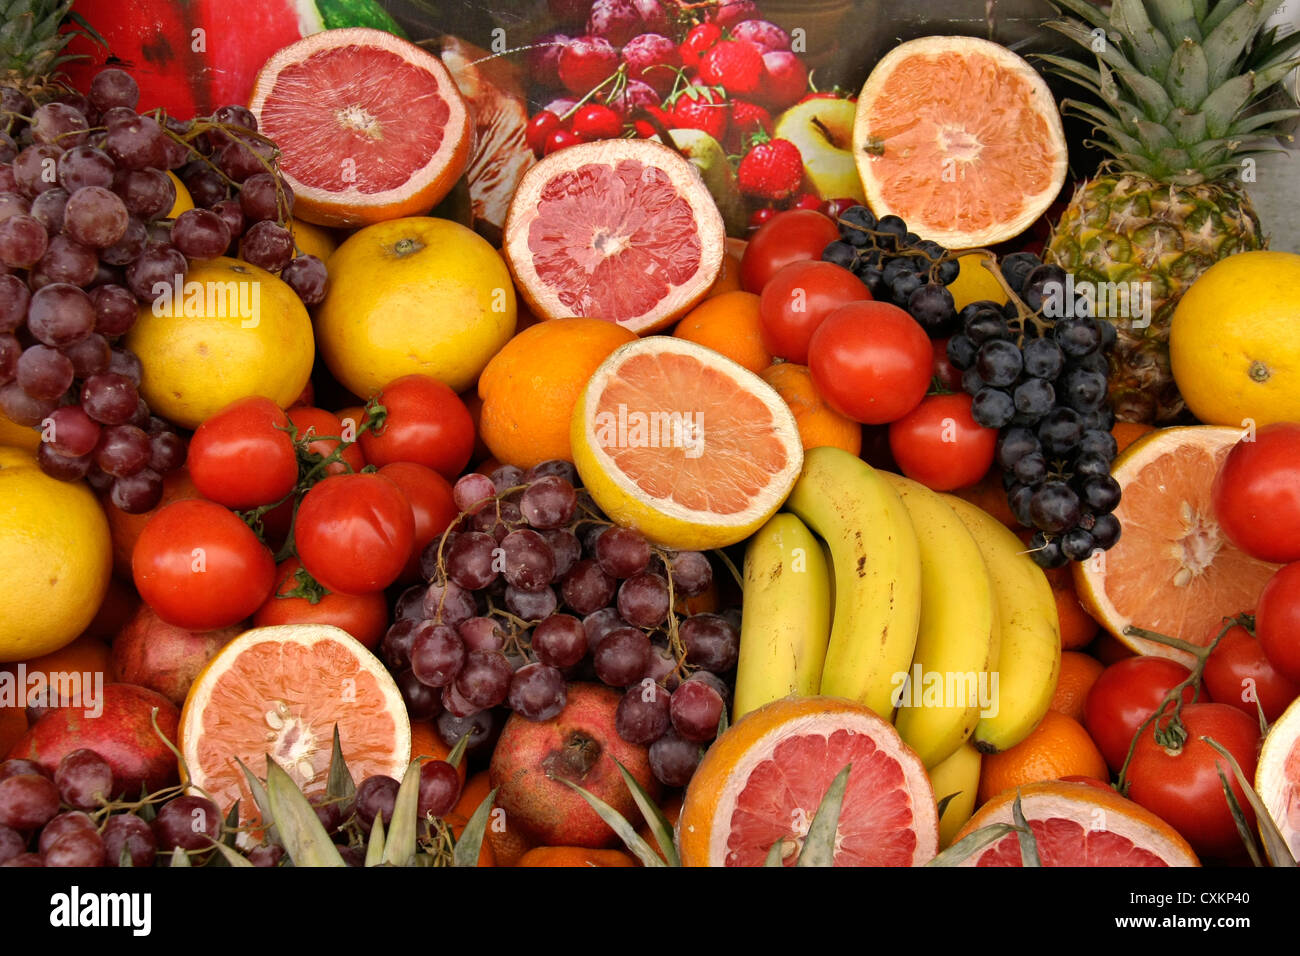 different types of fruits displayed for sale in a basket Stock Photo